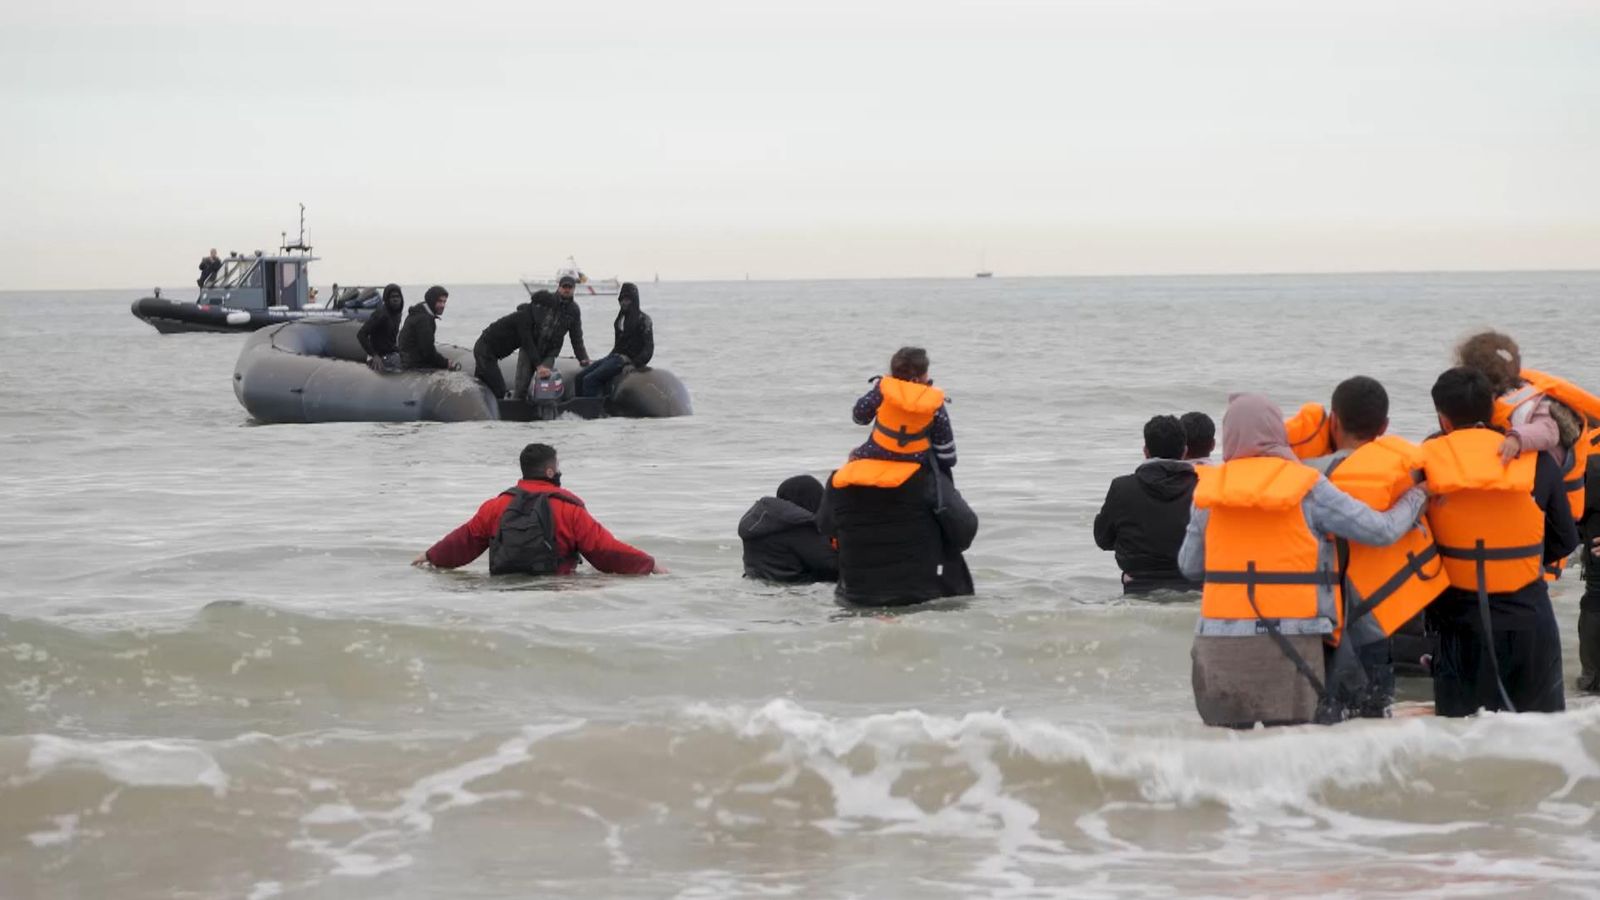 Dozens of police officers are powerless on French beaches as people smugglers exploit loopholes to pack dinghy